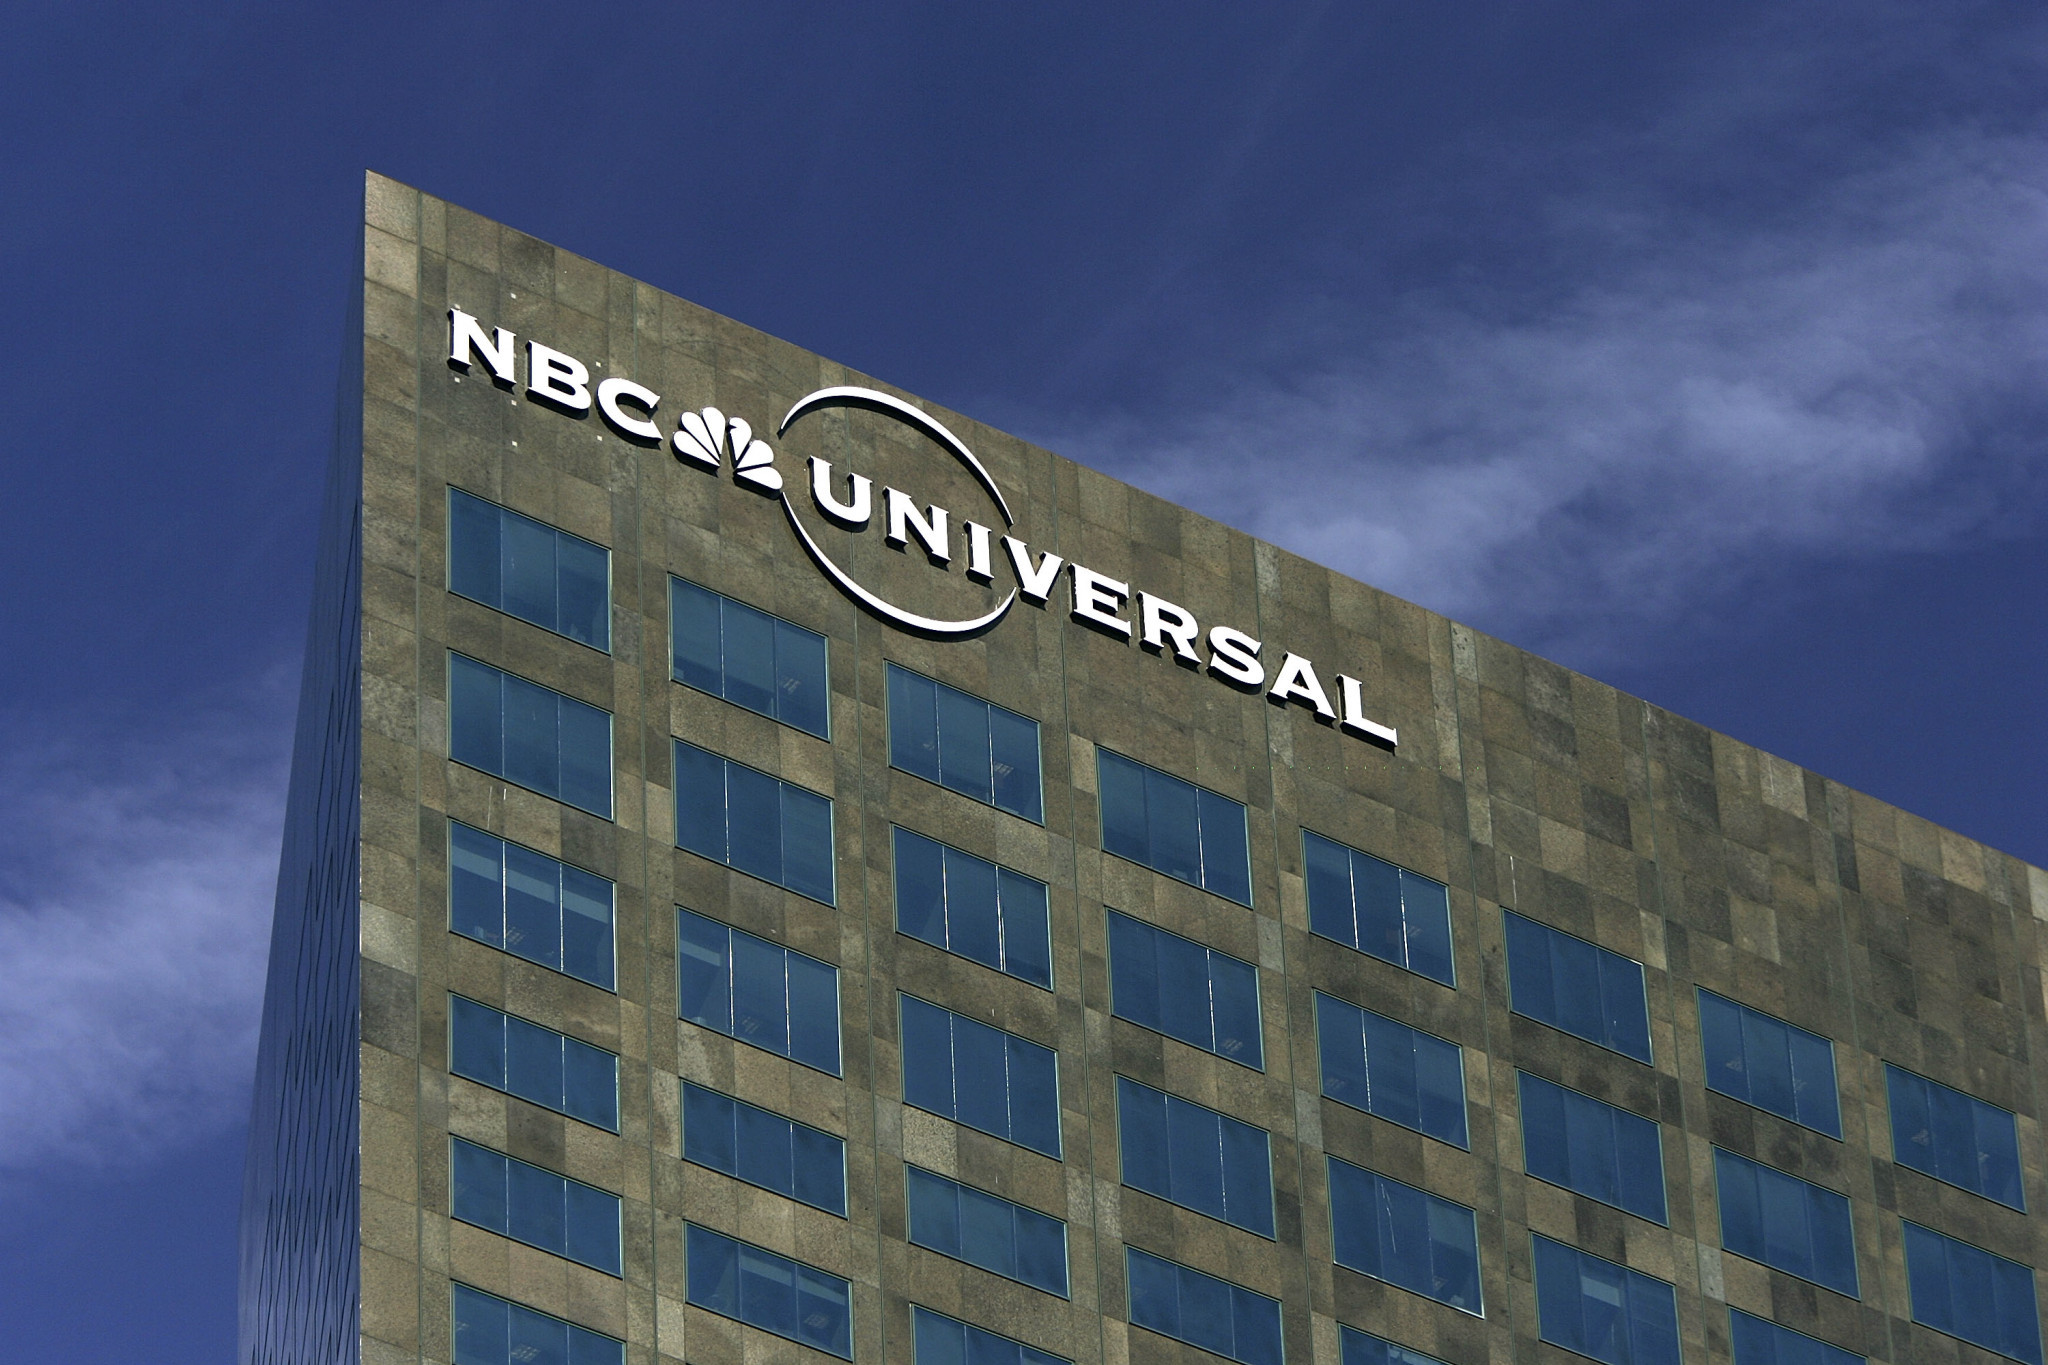 NBCUniversal says ad sales for Paris 2024 ahead compared to Tokyo 2020